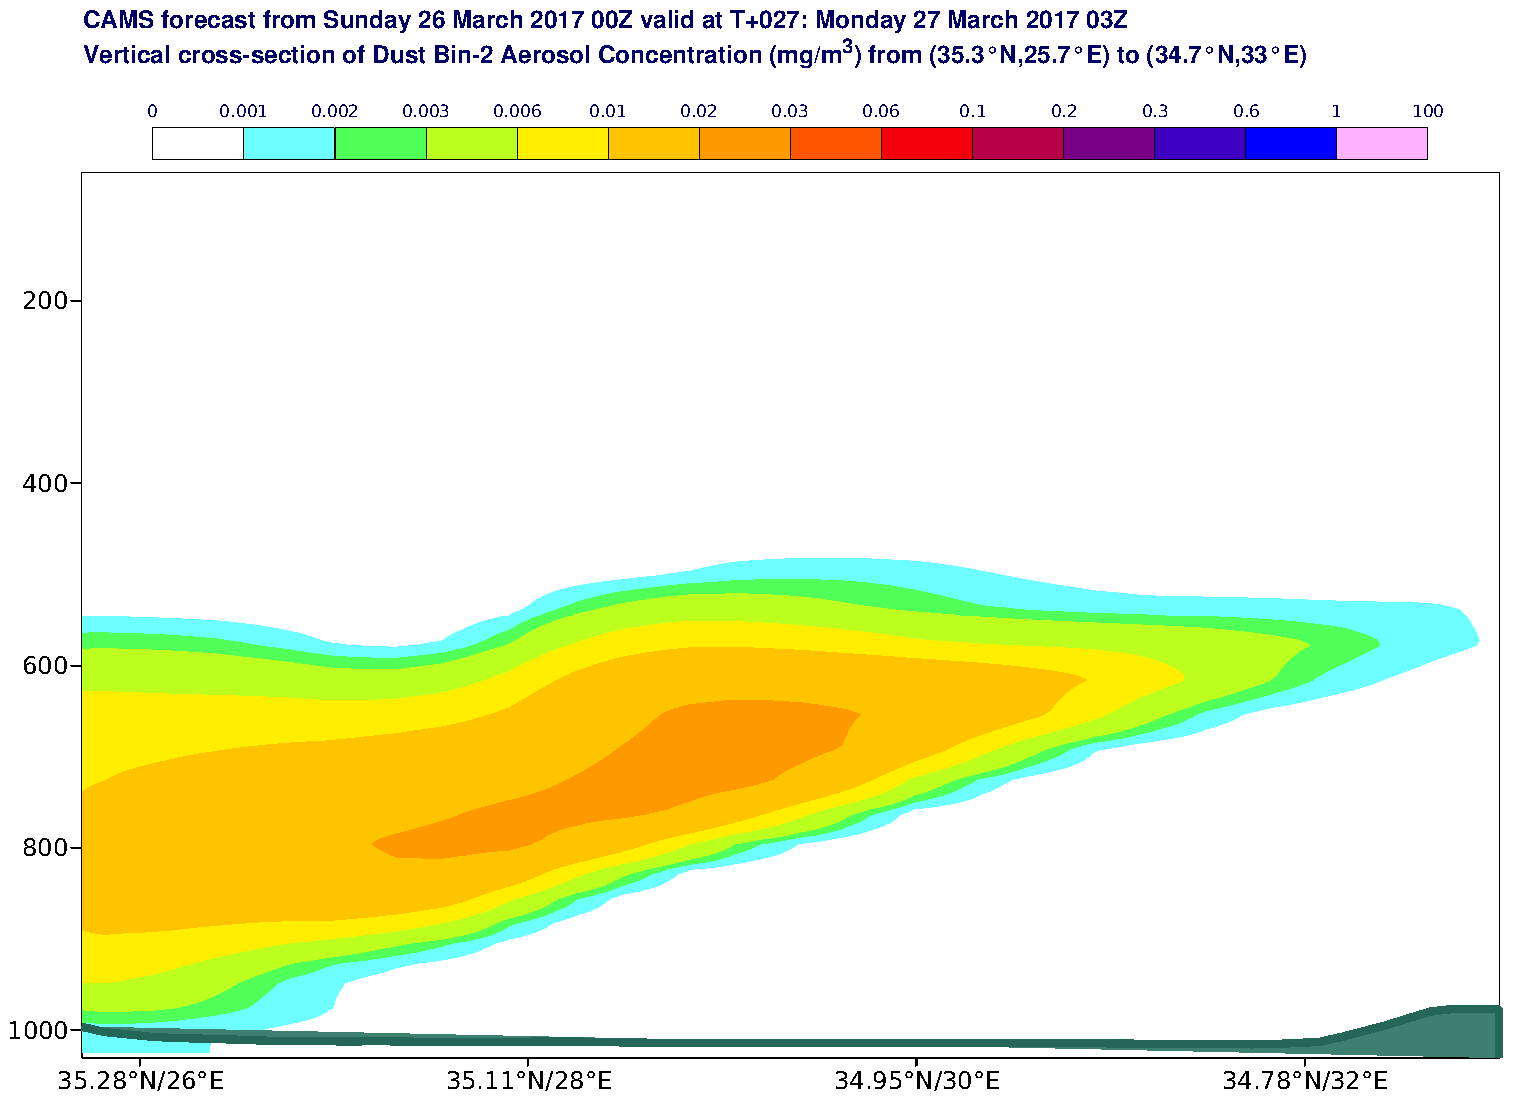 Vertical cross-section of Dust Bin-2 Aerosol Concentration (mg/m3) valid at T27 - 2017-03-27 03:00